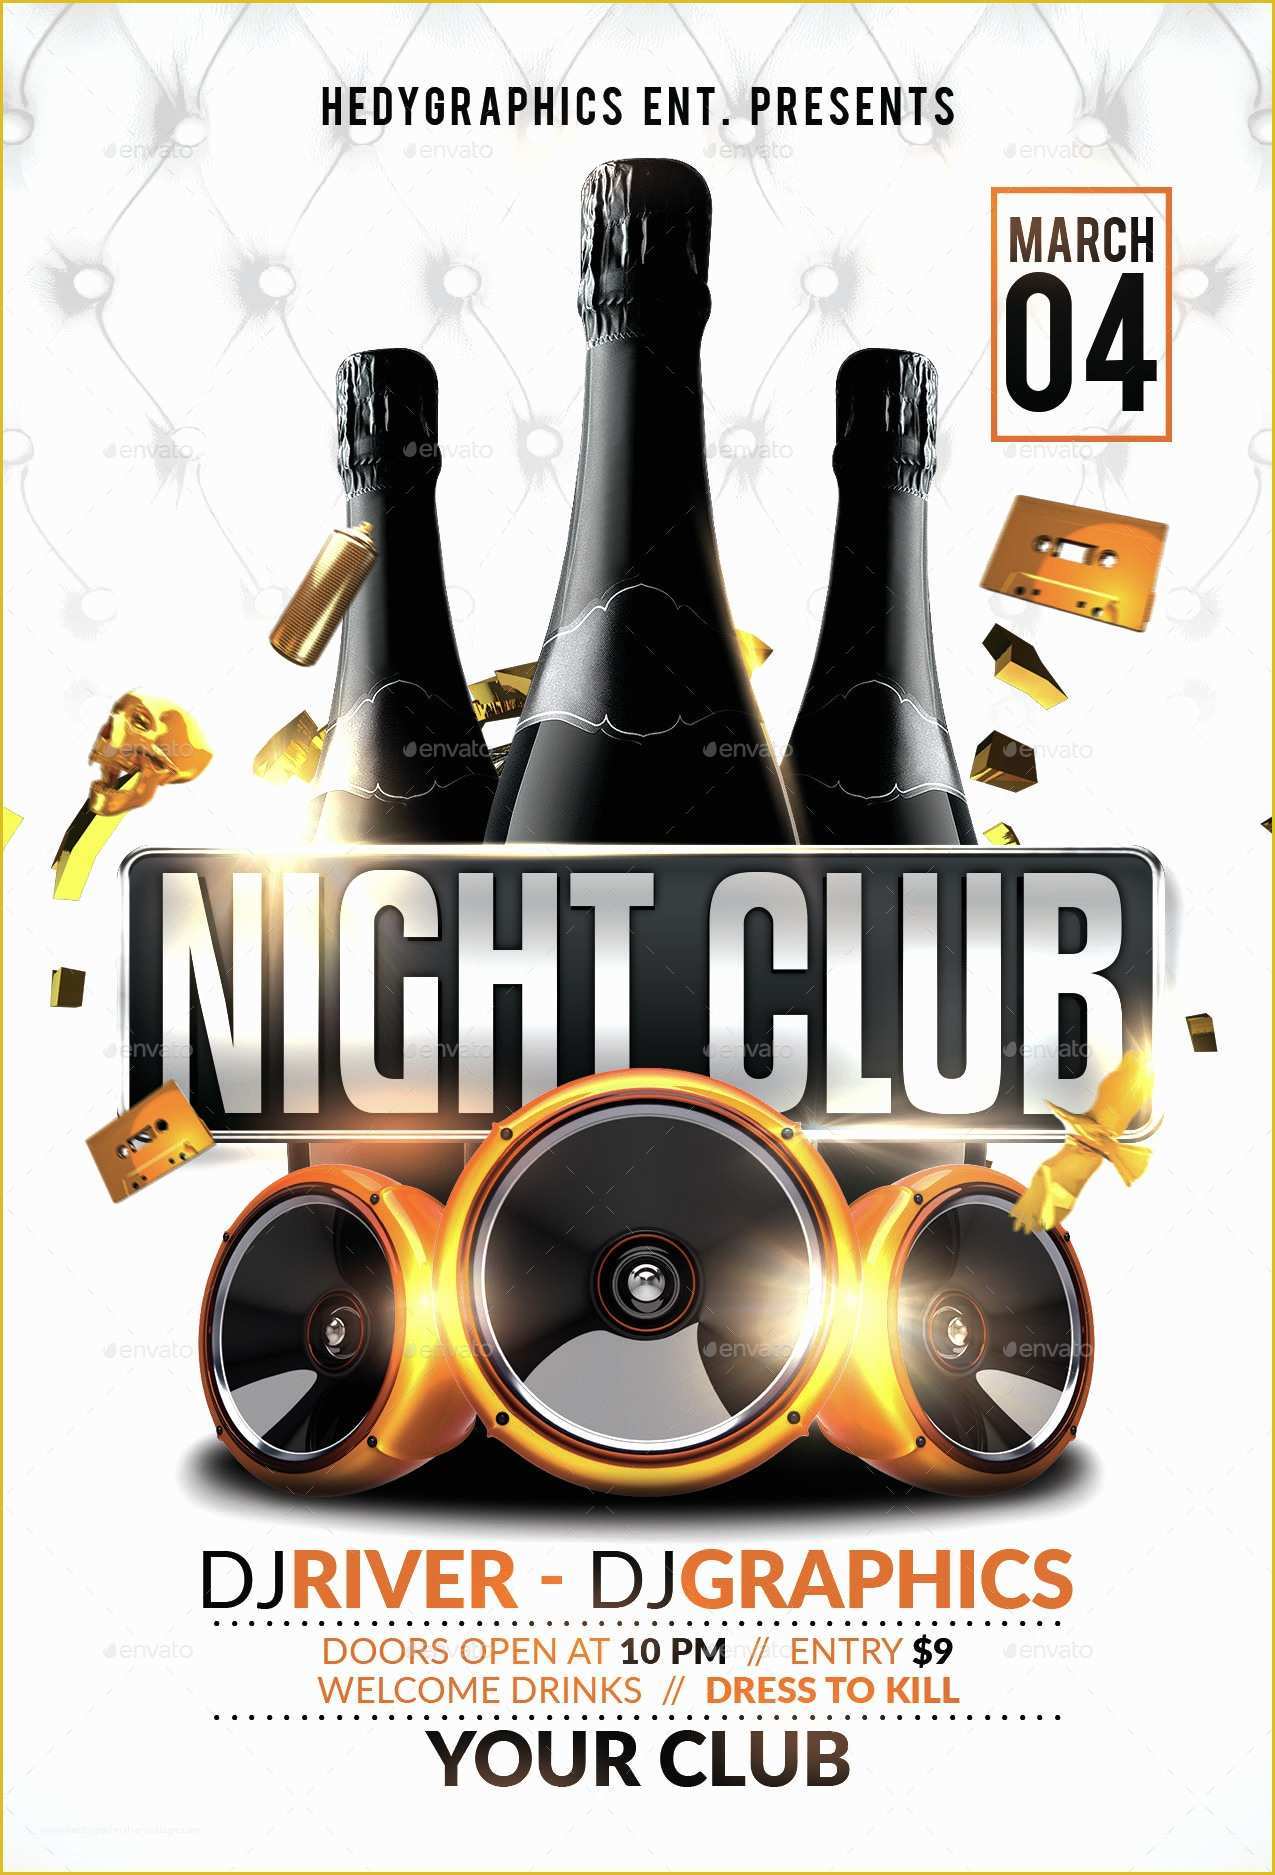 Free Nightclub Flyer Templates Of Night Club Flyer Template by Hedygraphics